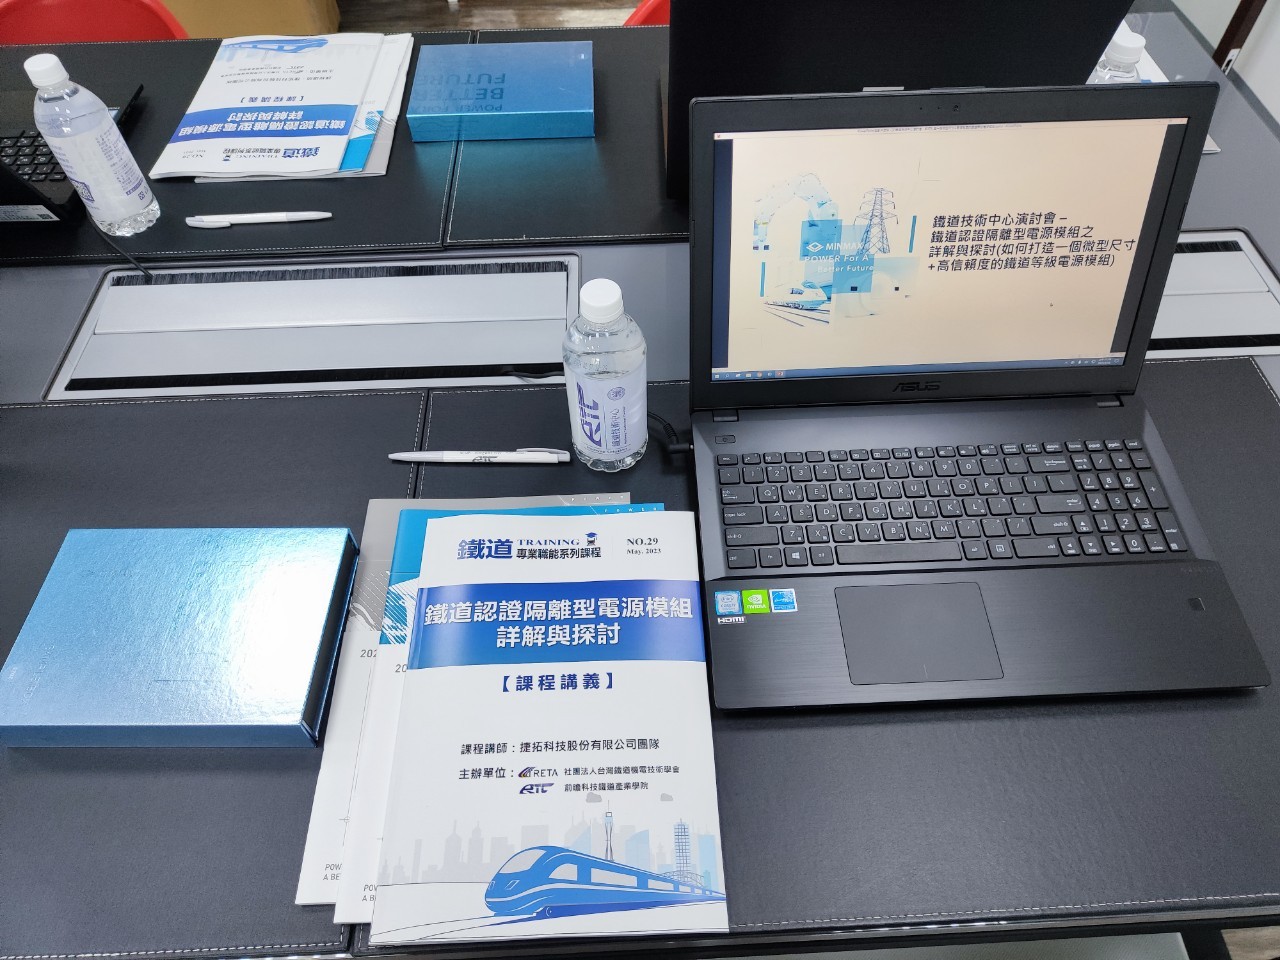 MINMAX's teaching manual and product sample box for students